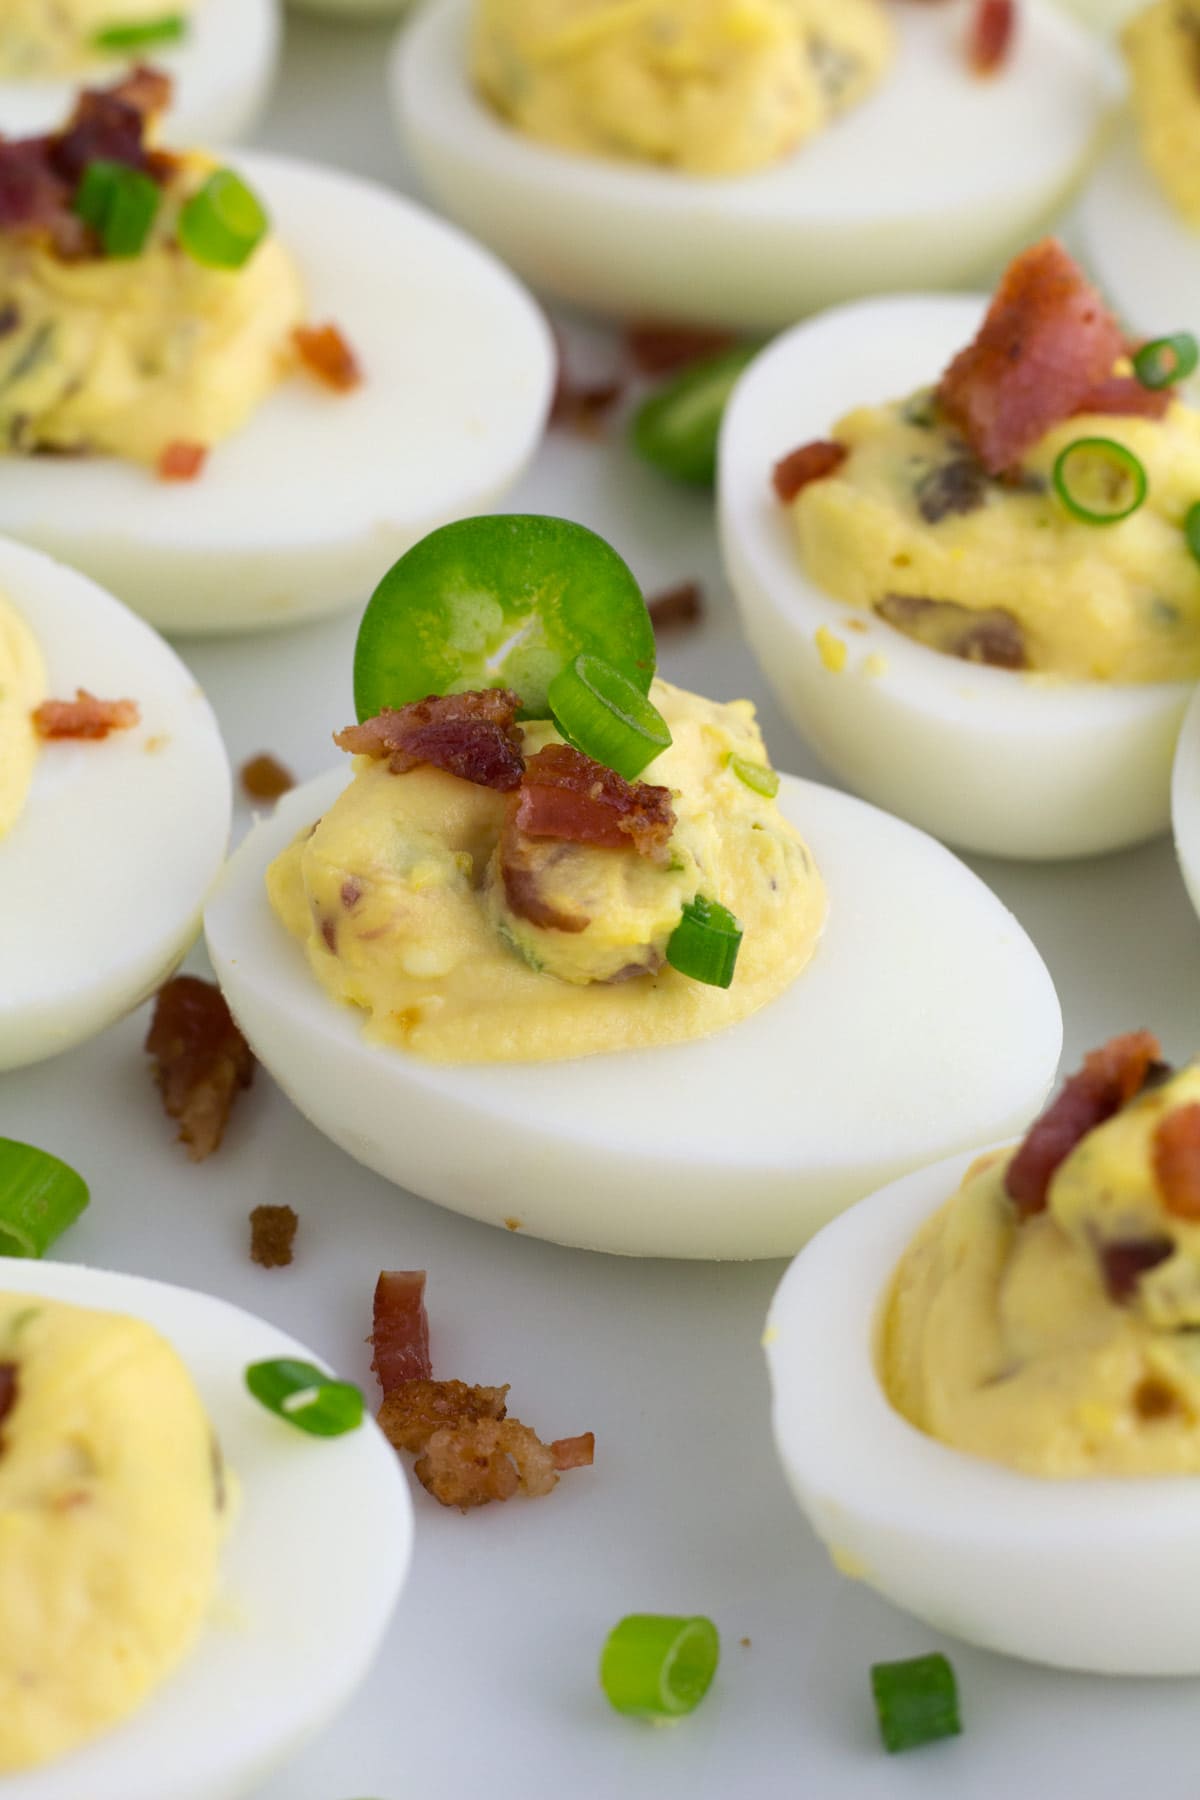 Jalapeno and bacon bits on the top of deviled eggs are on serving platter.